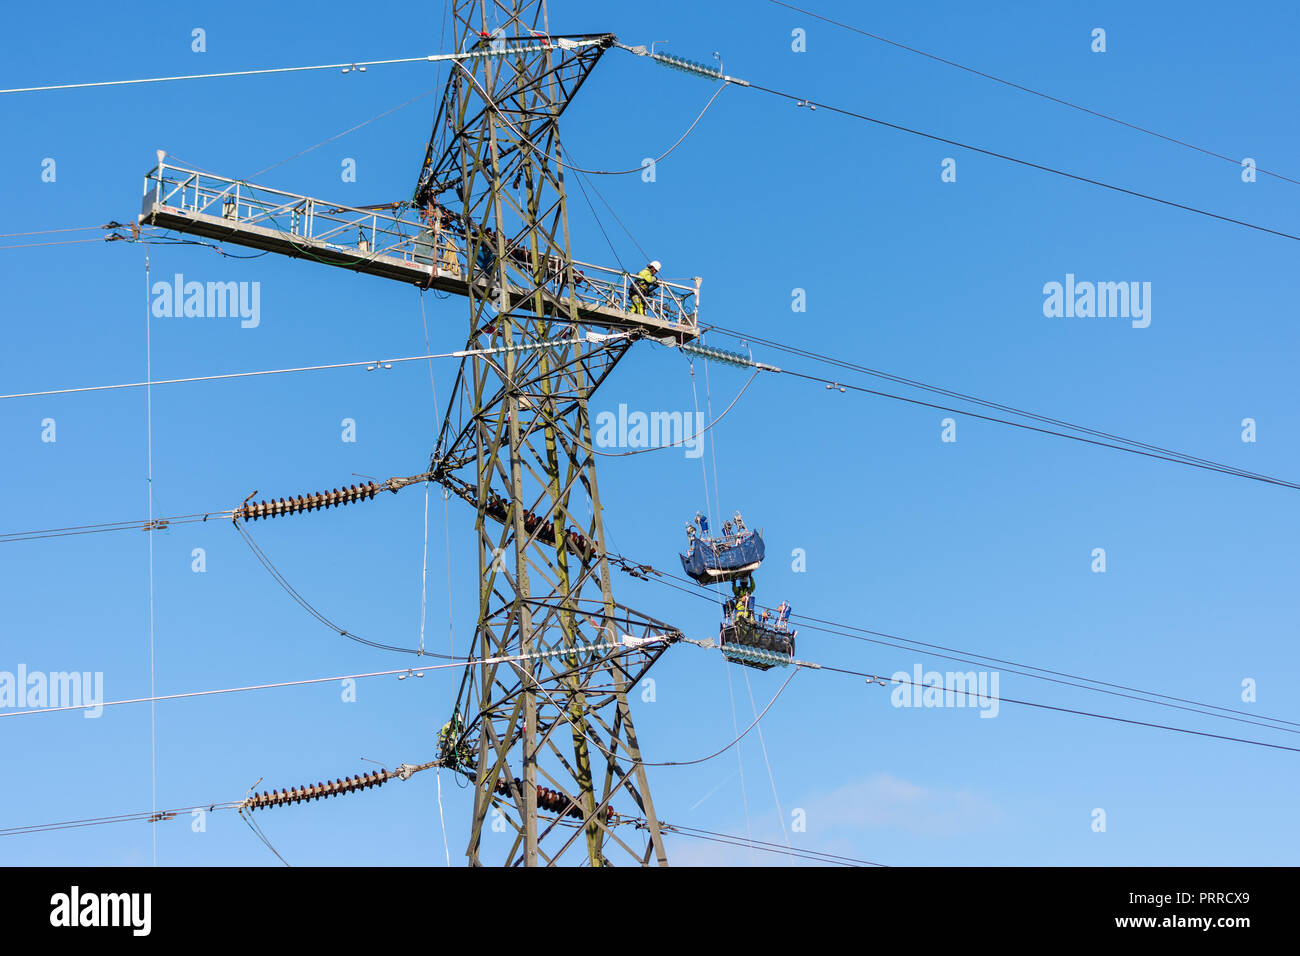 Workers replacing high voltage electricity cable on a pylon using platforms and baskets suspended from the pylon Stock Photo